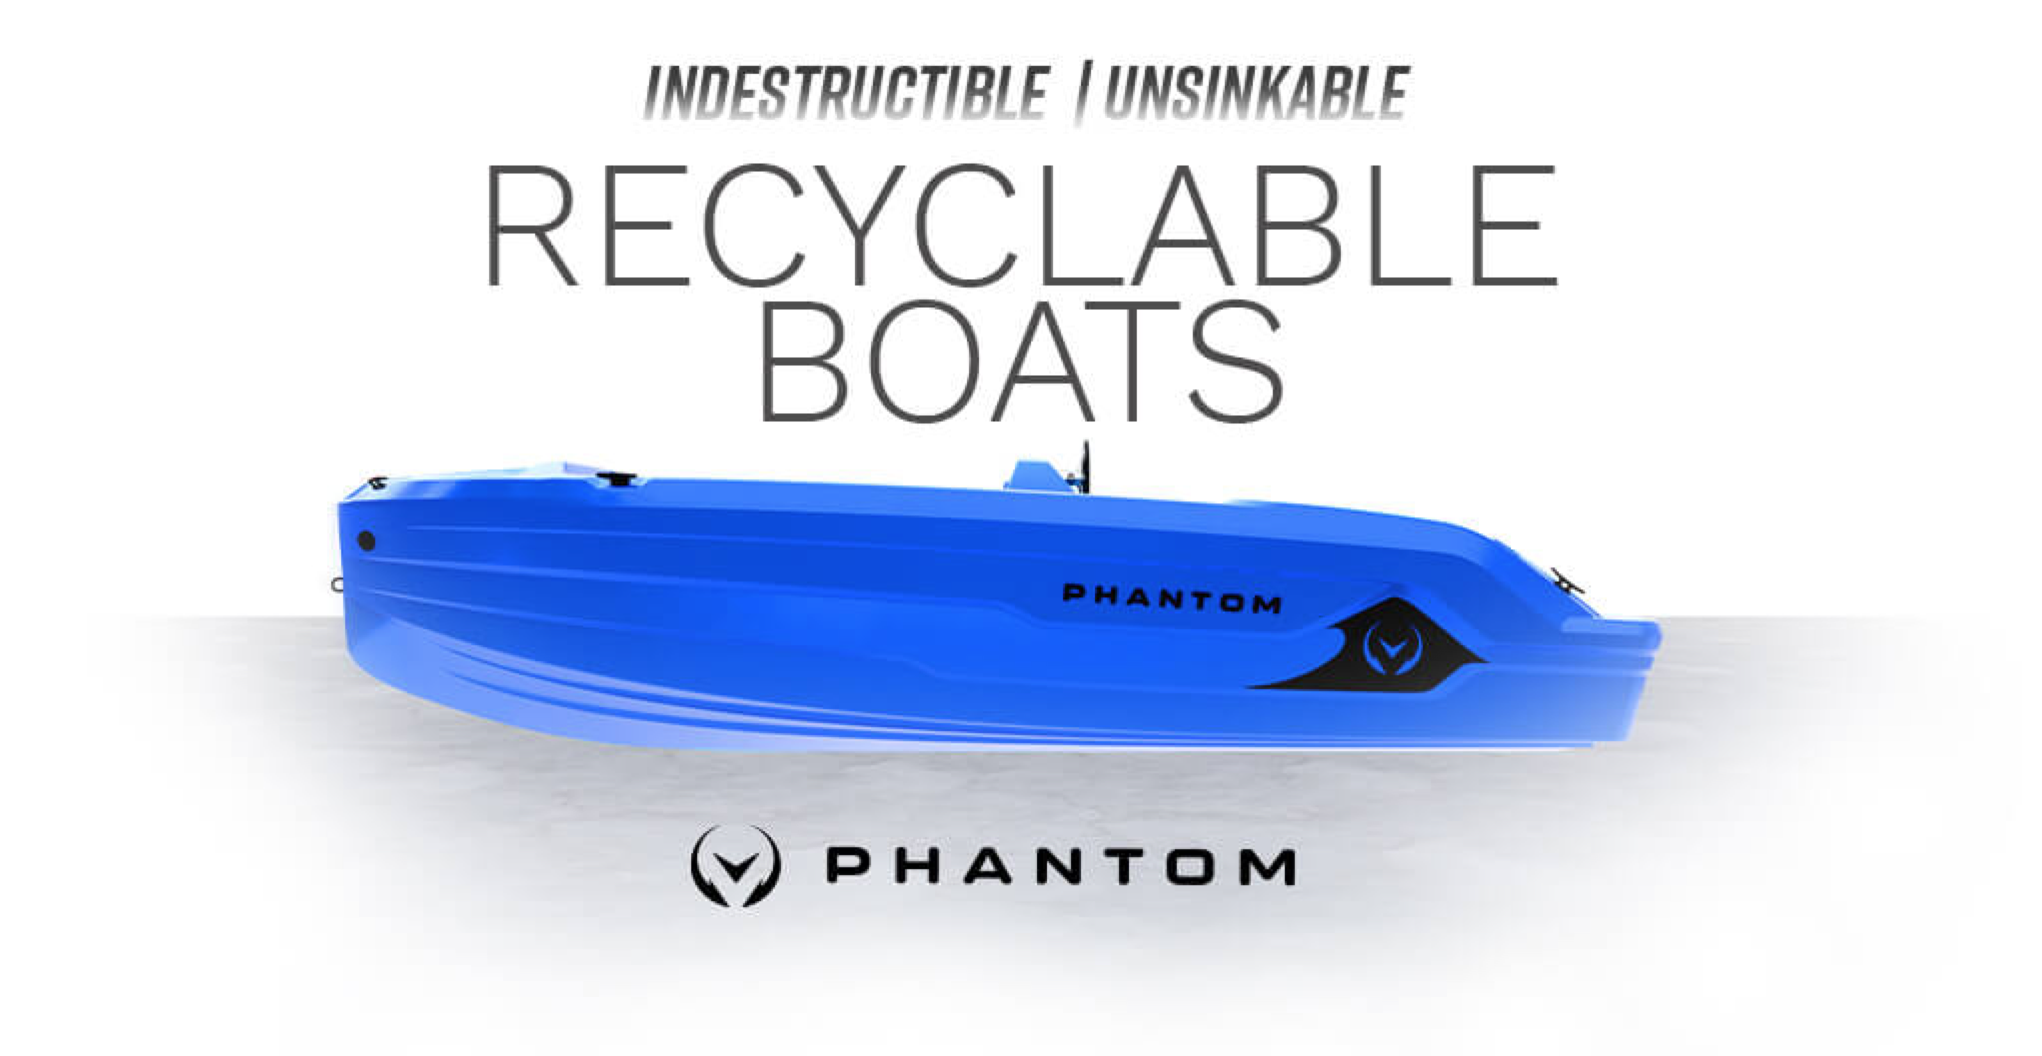 Vision Marine Partners with Nautical Ventures to Distribute New Fully Electric Recyclable Boat